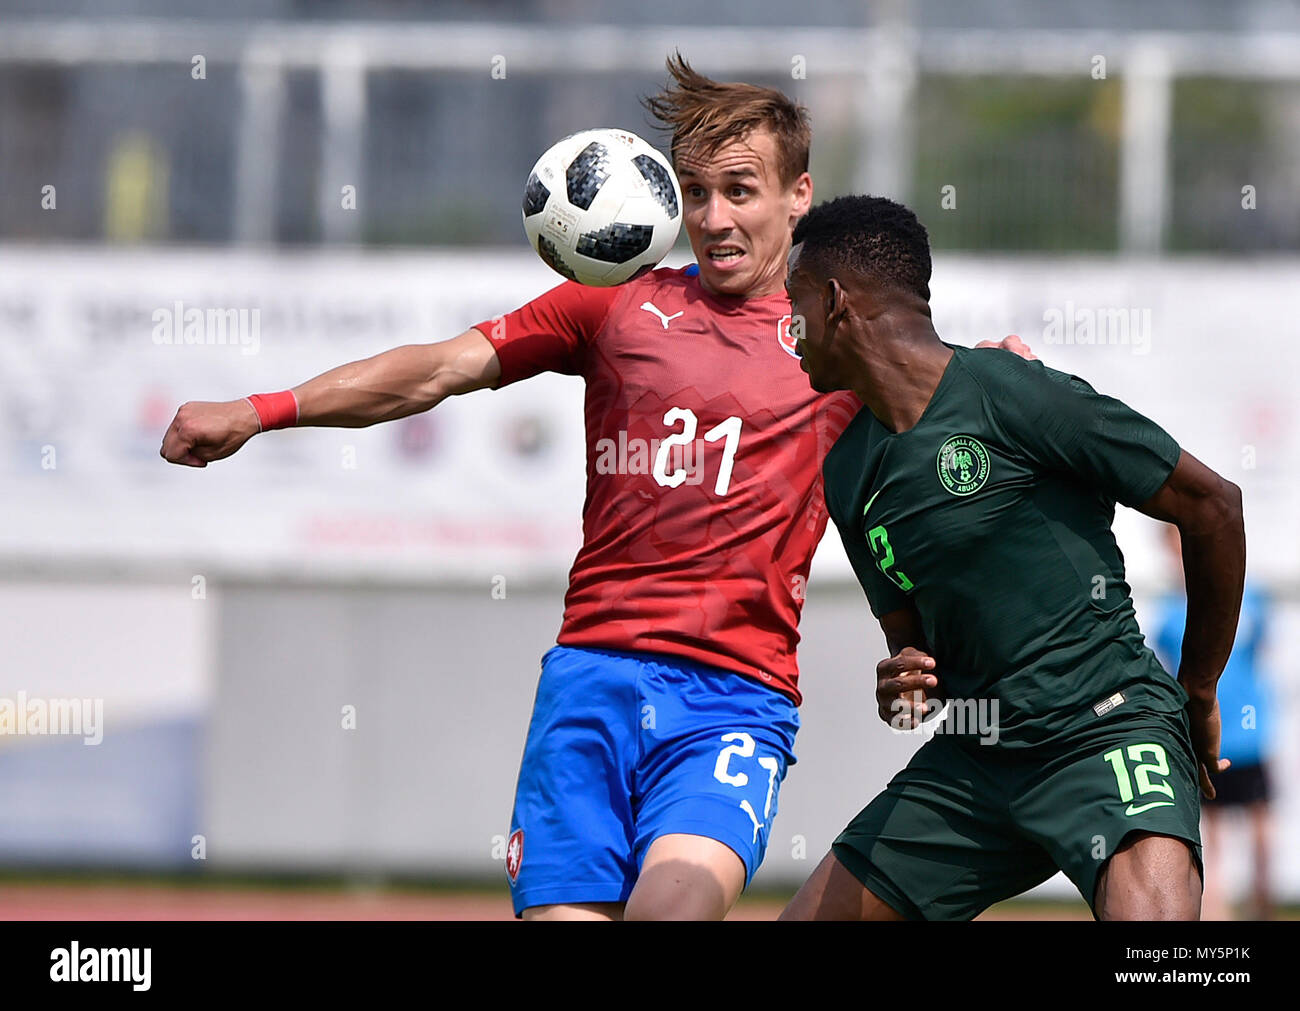 L-R Josef Sural (CZE) and Shehu Abdullahi (NGA) in action during the warm-up match Czech Republic vs Nigeria, in Schwechat, Austria, on June 6, 2018. (CTK Photo/Lubos Pavlicek) Stock Photo